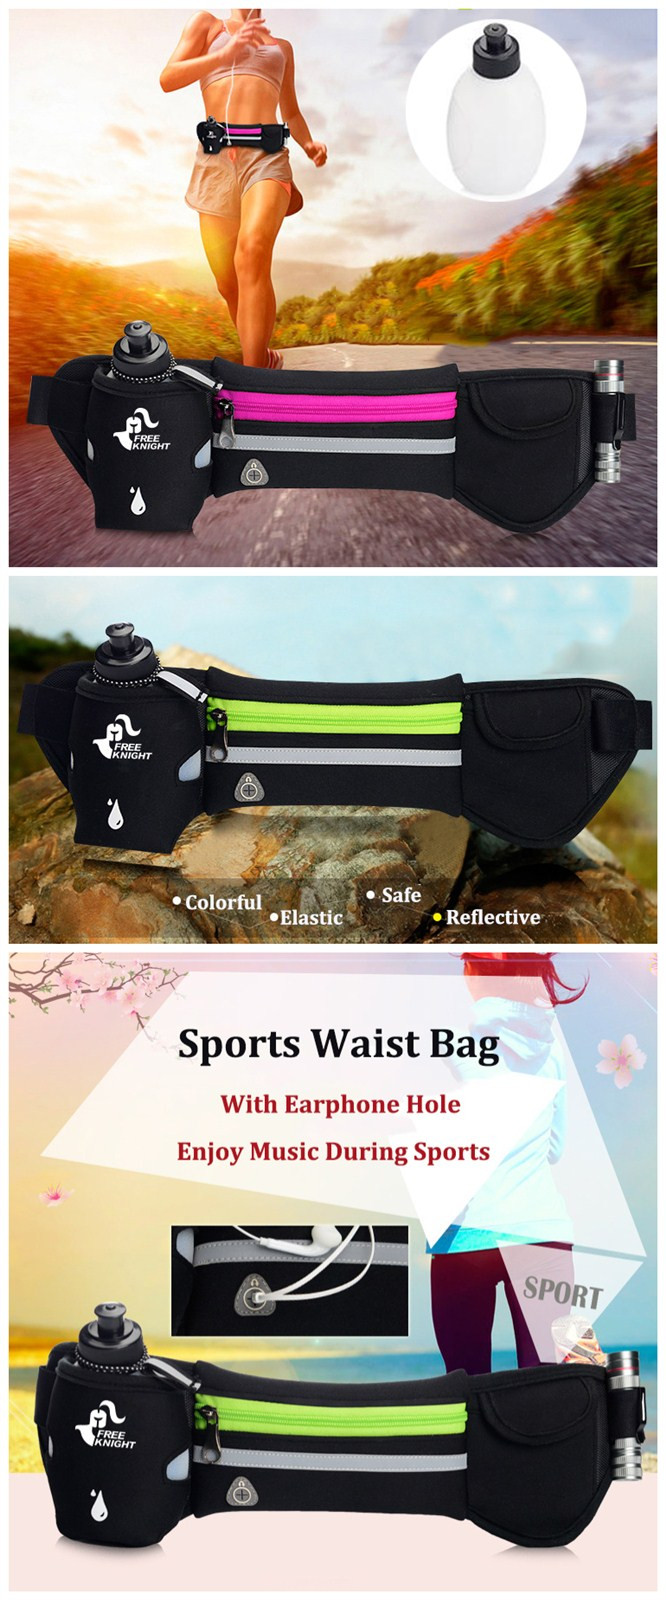 Free-Knight-Sports-Reflective-Waist-Bag-Bottle-Pouch-iPhone-7-Plus-Holder-With-Earphone-Hole-1120378-1